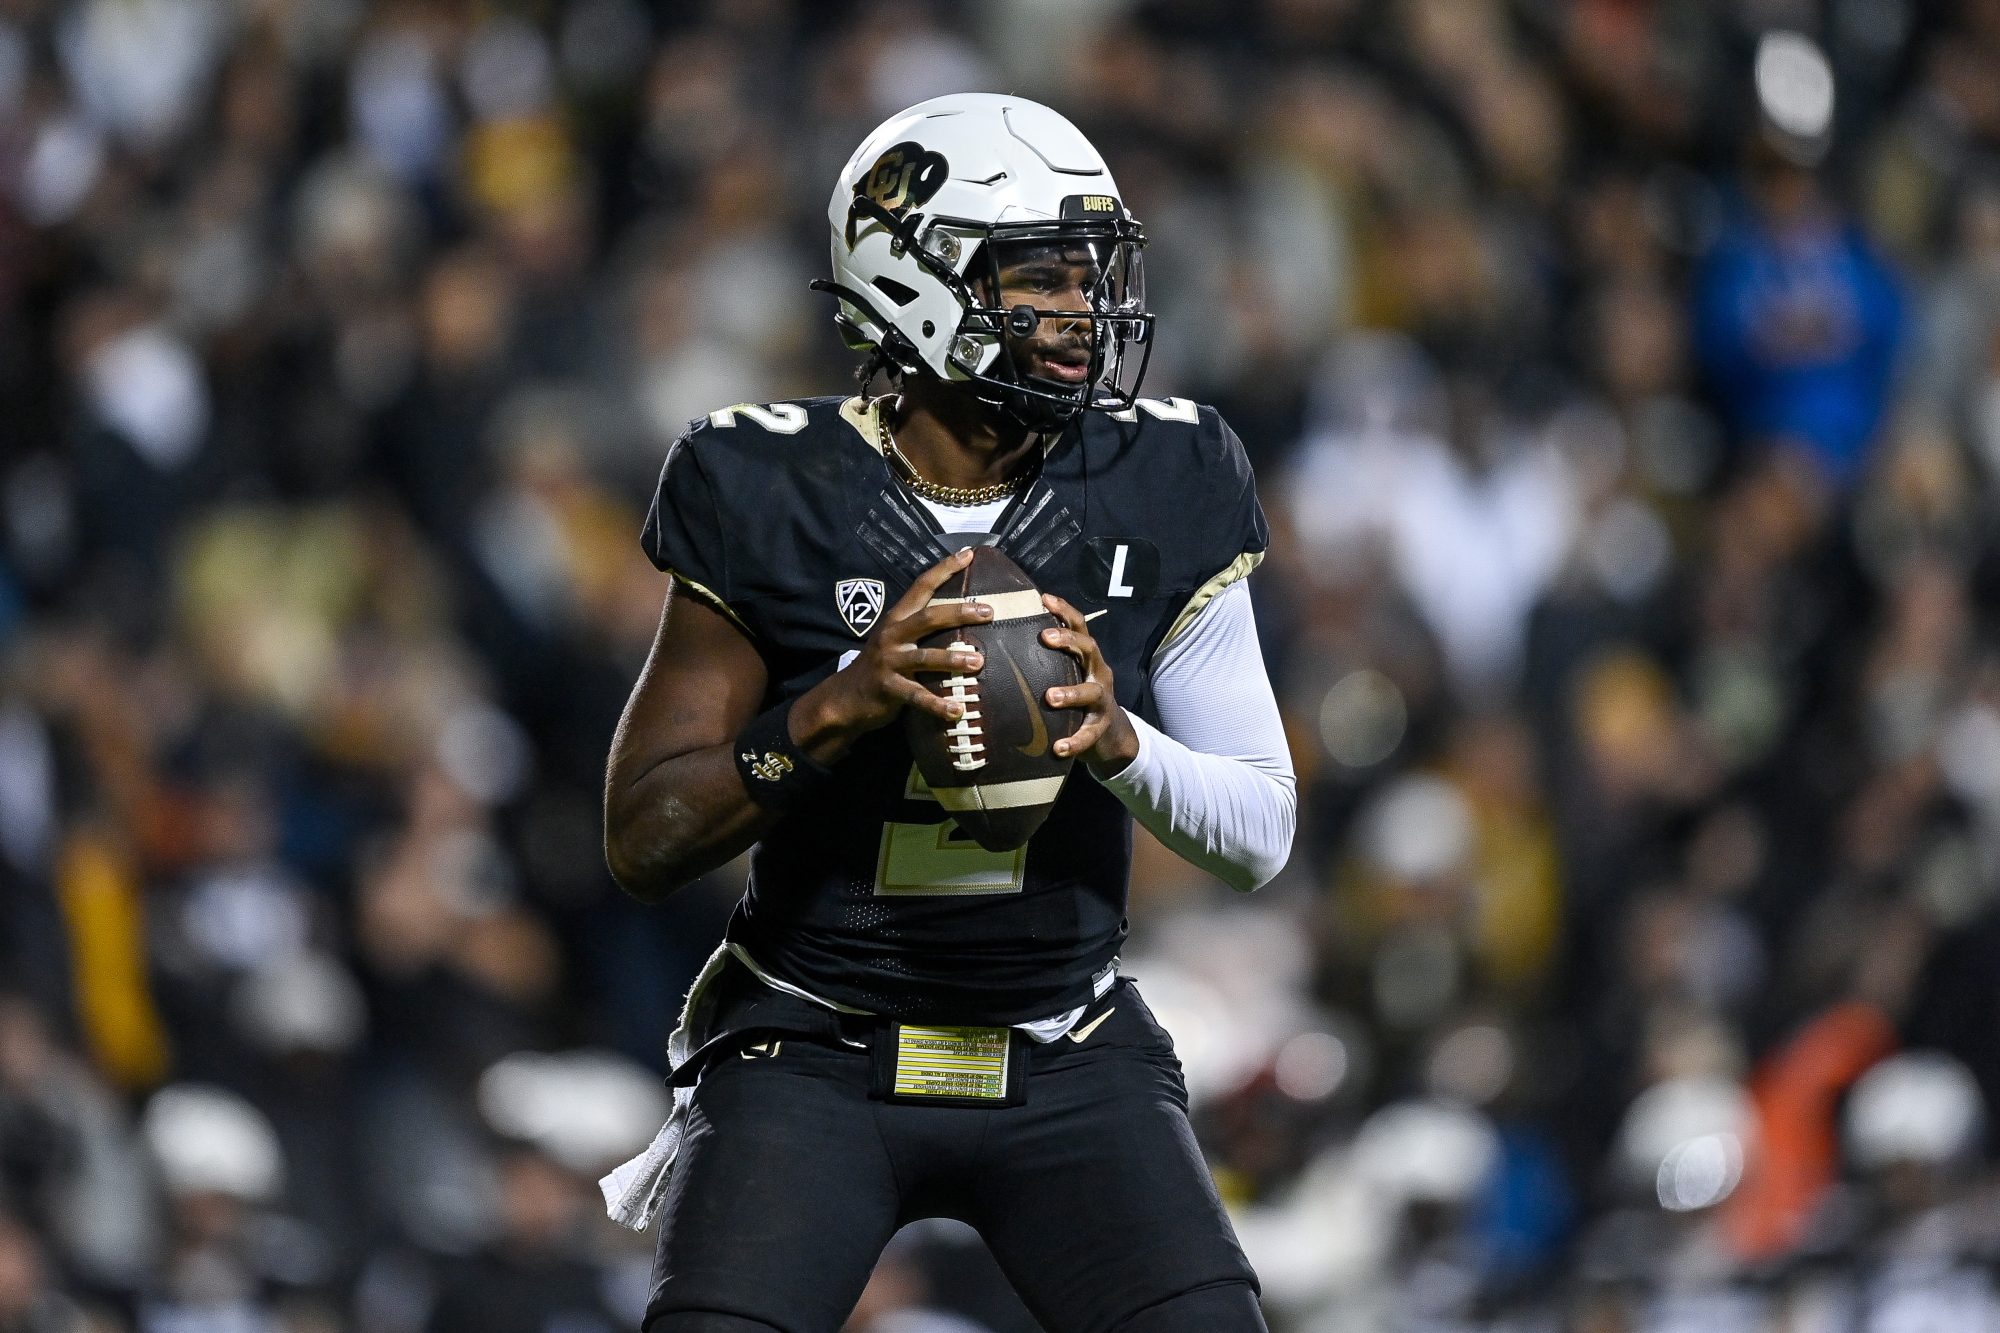 Colorado quarterback Shedeur Sanders, son of NFL Hall-of-Famer and Buffaloes head coach Deion Sanders, is a heavy favorite to be the first name off the board next April at +100 odds with DraftKings Sportsbook.